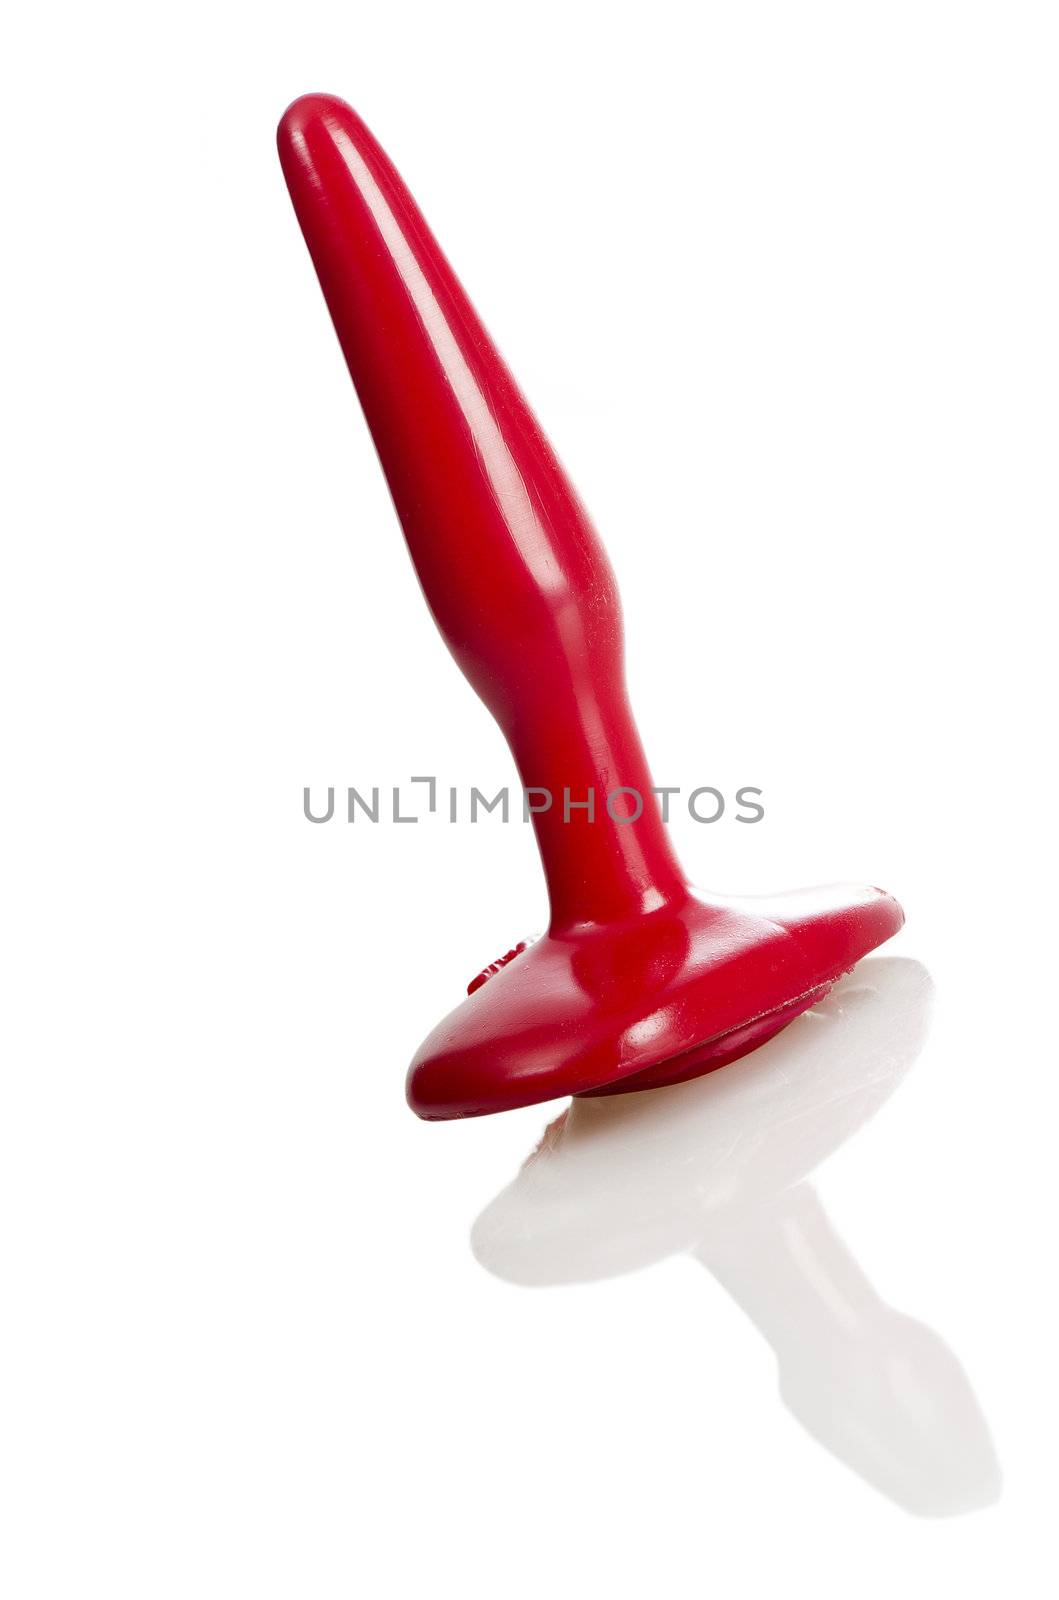 Erotic toys: Anal plug in red by stockbymh